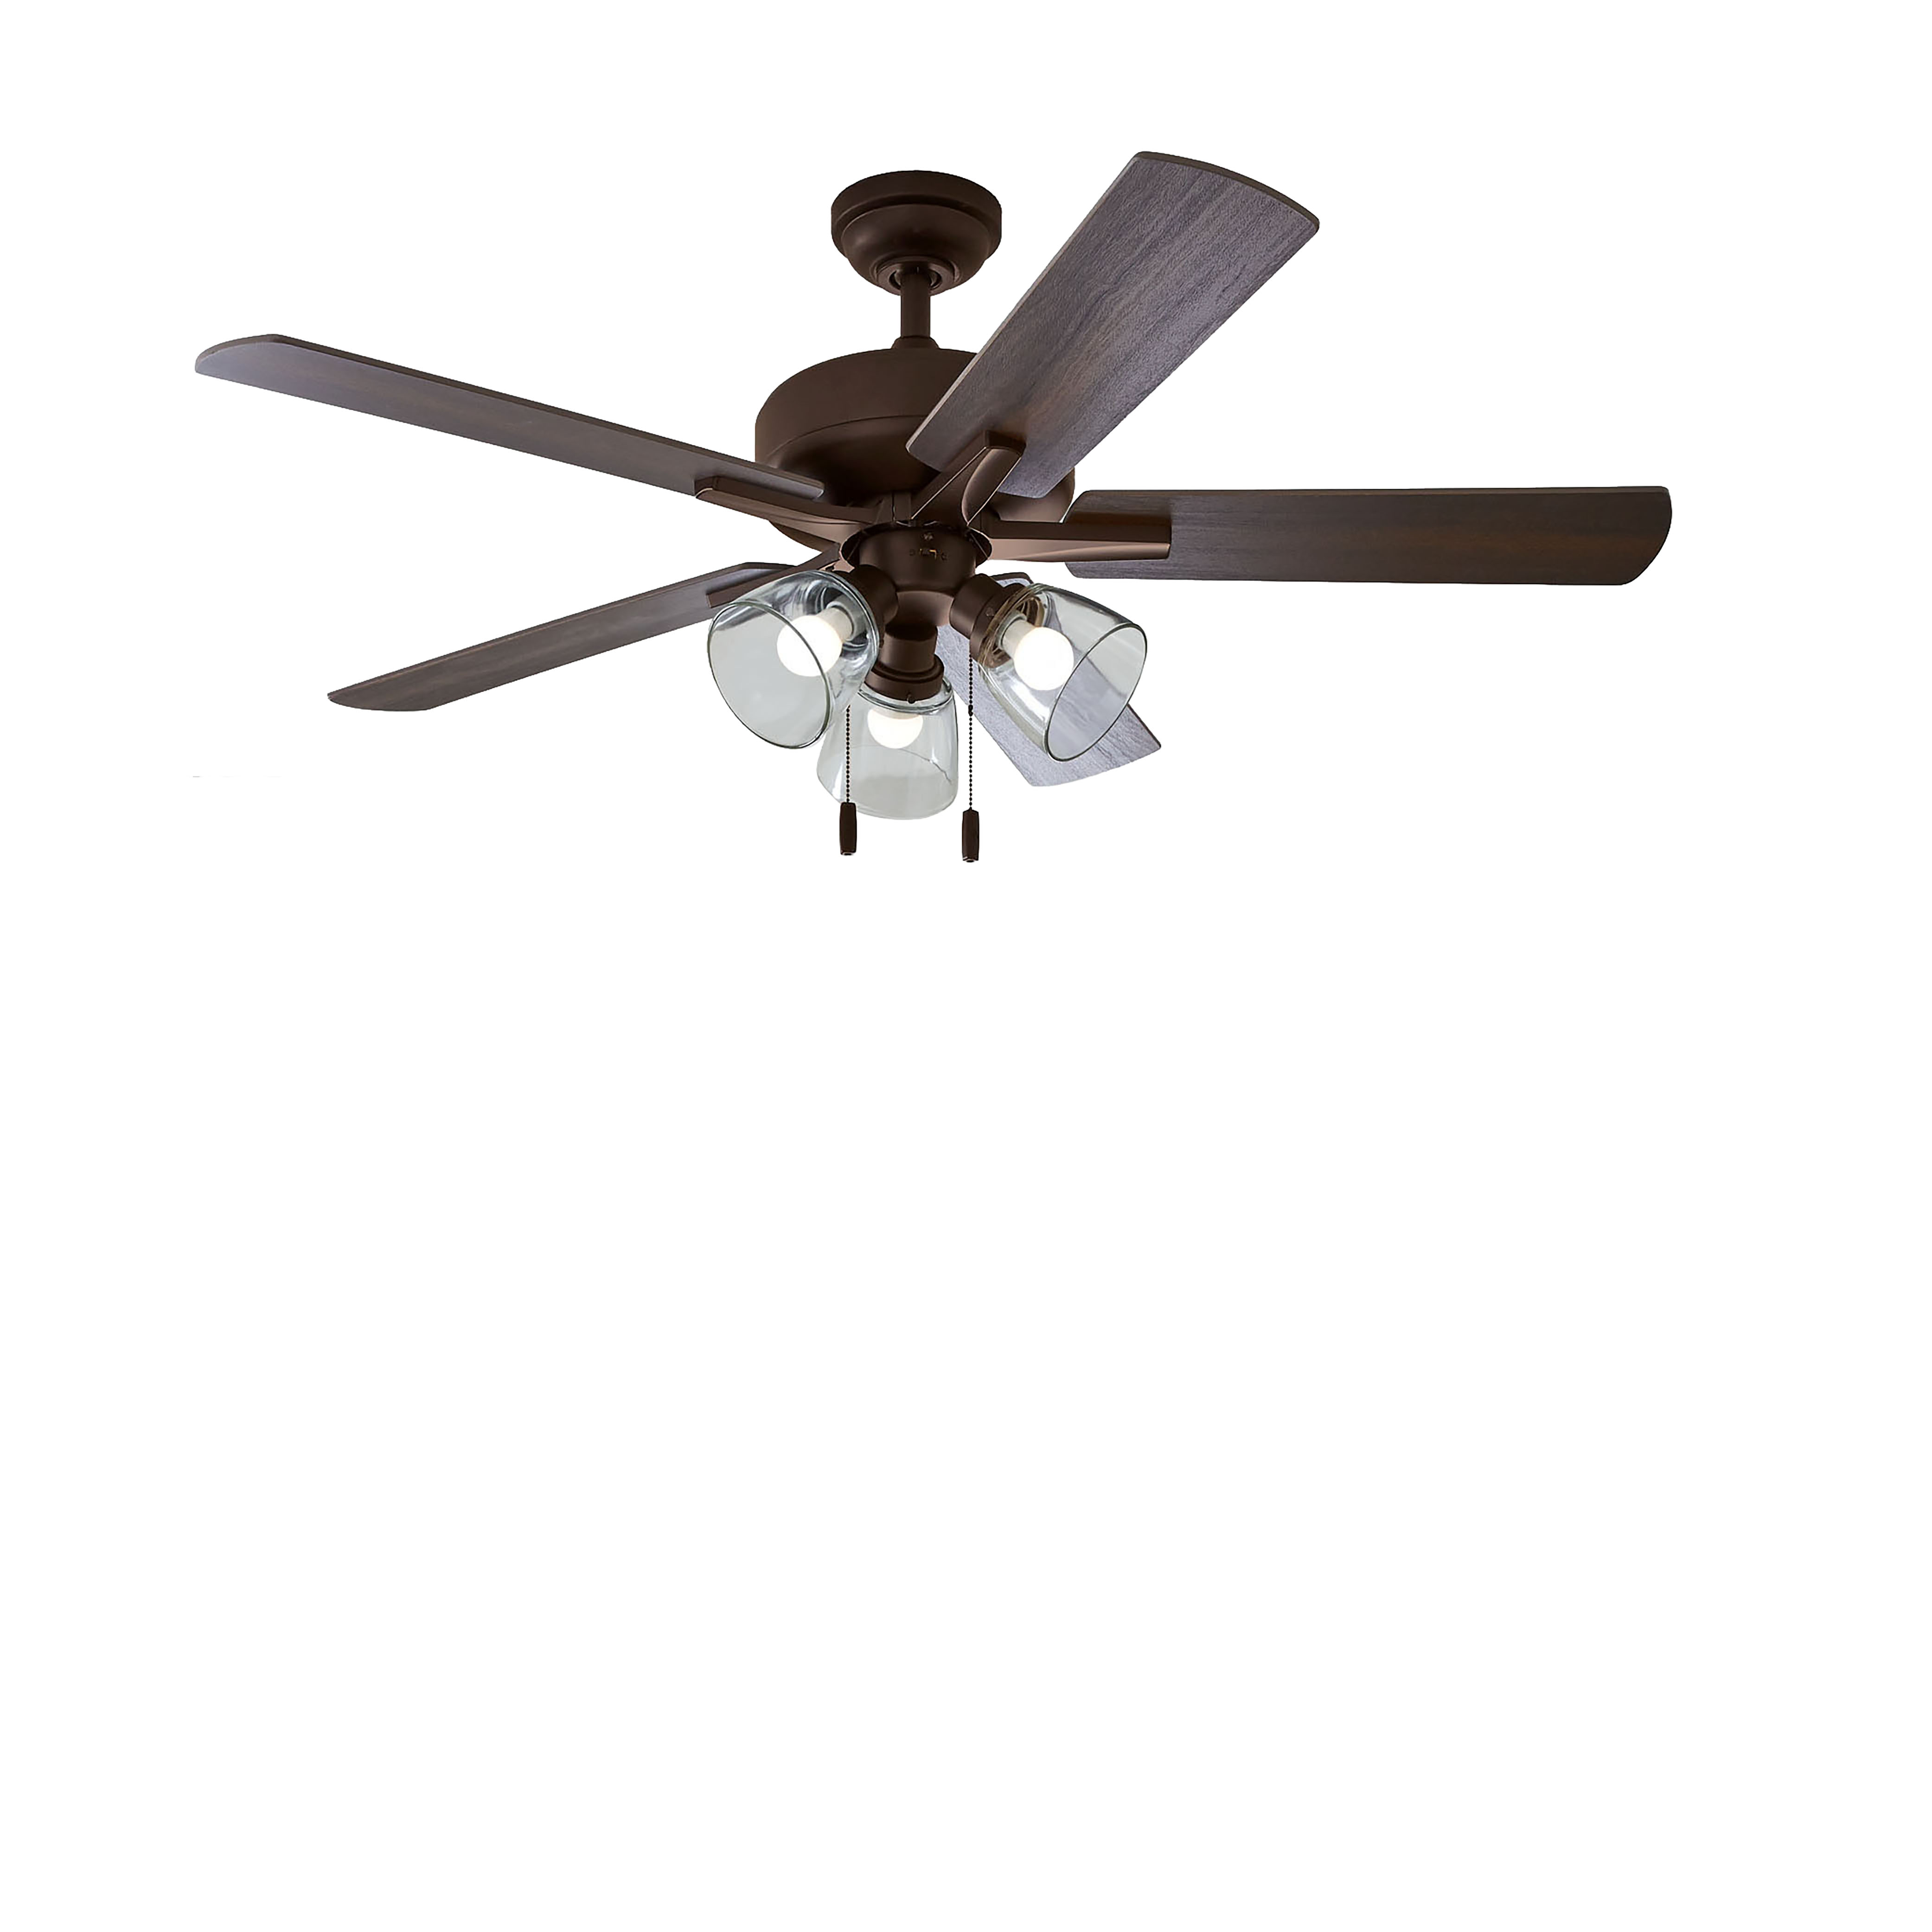 Better Homes & Gardens 52" Bronze Coastal Ceiling Fan, 5 Reversible Blade, 3 LED Bulbs Included - image 1 of 10